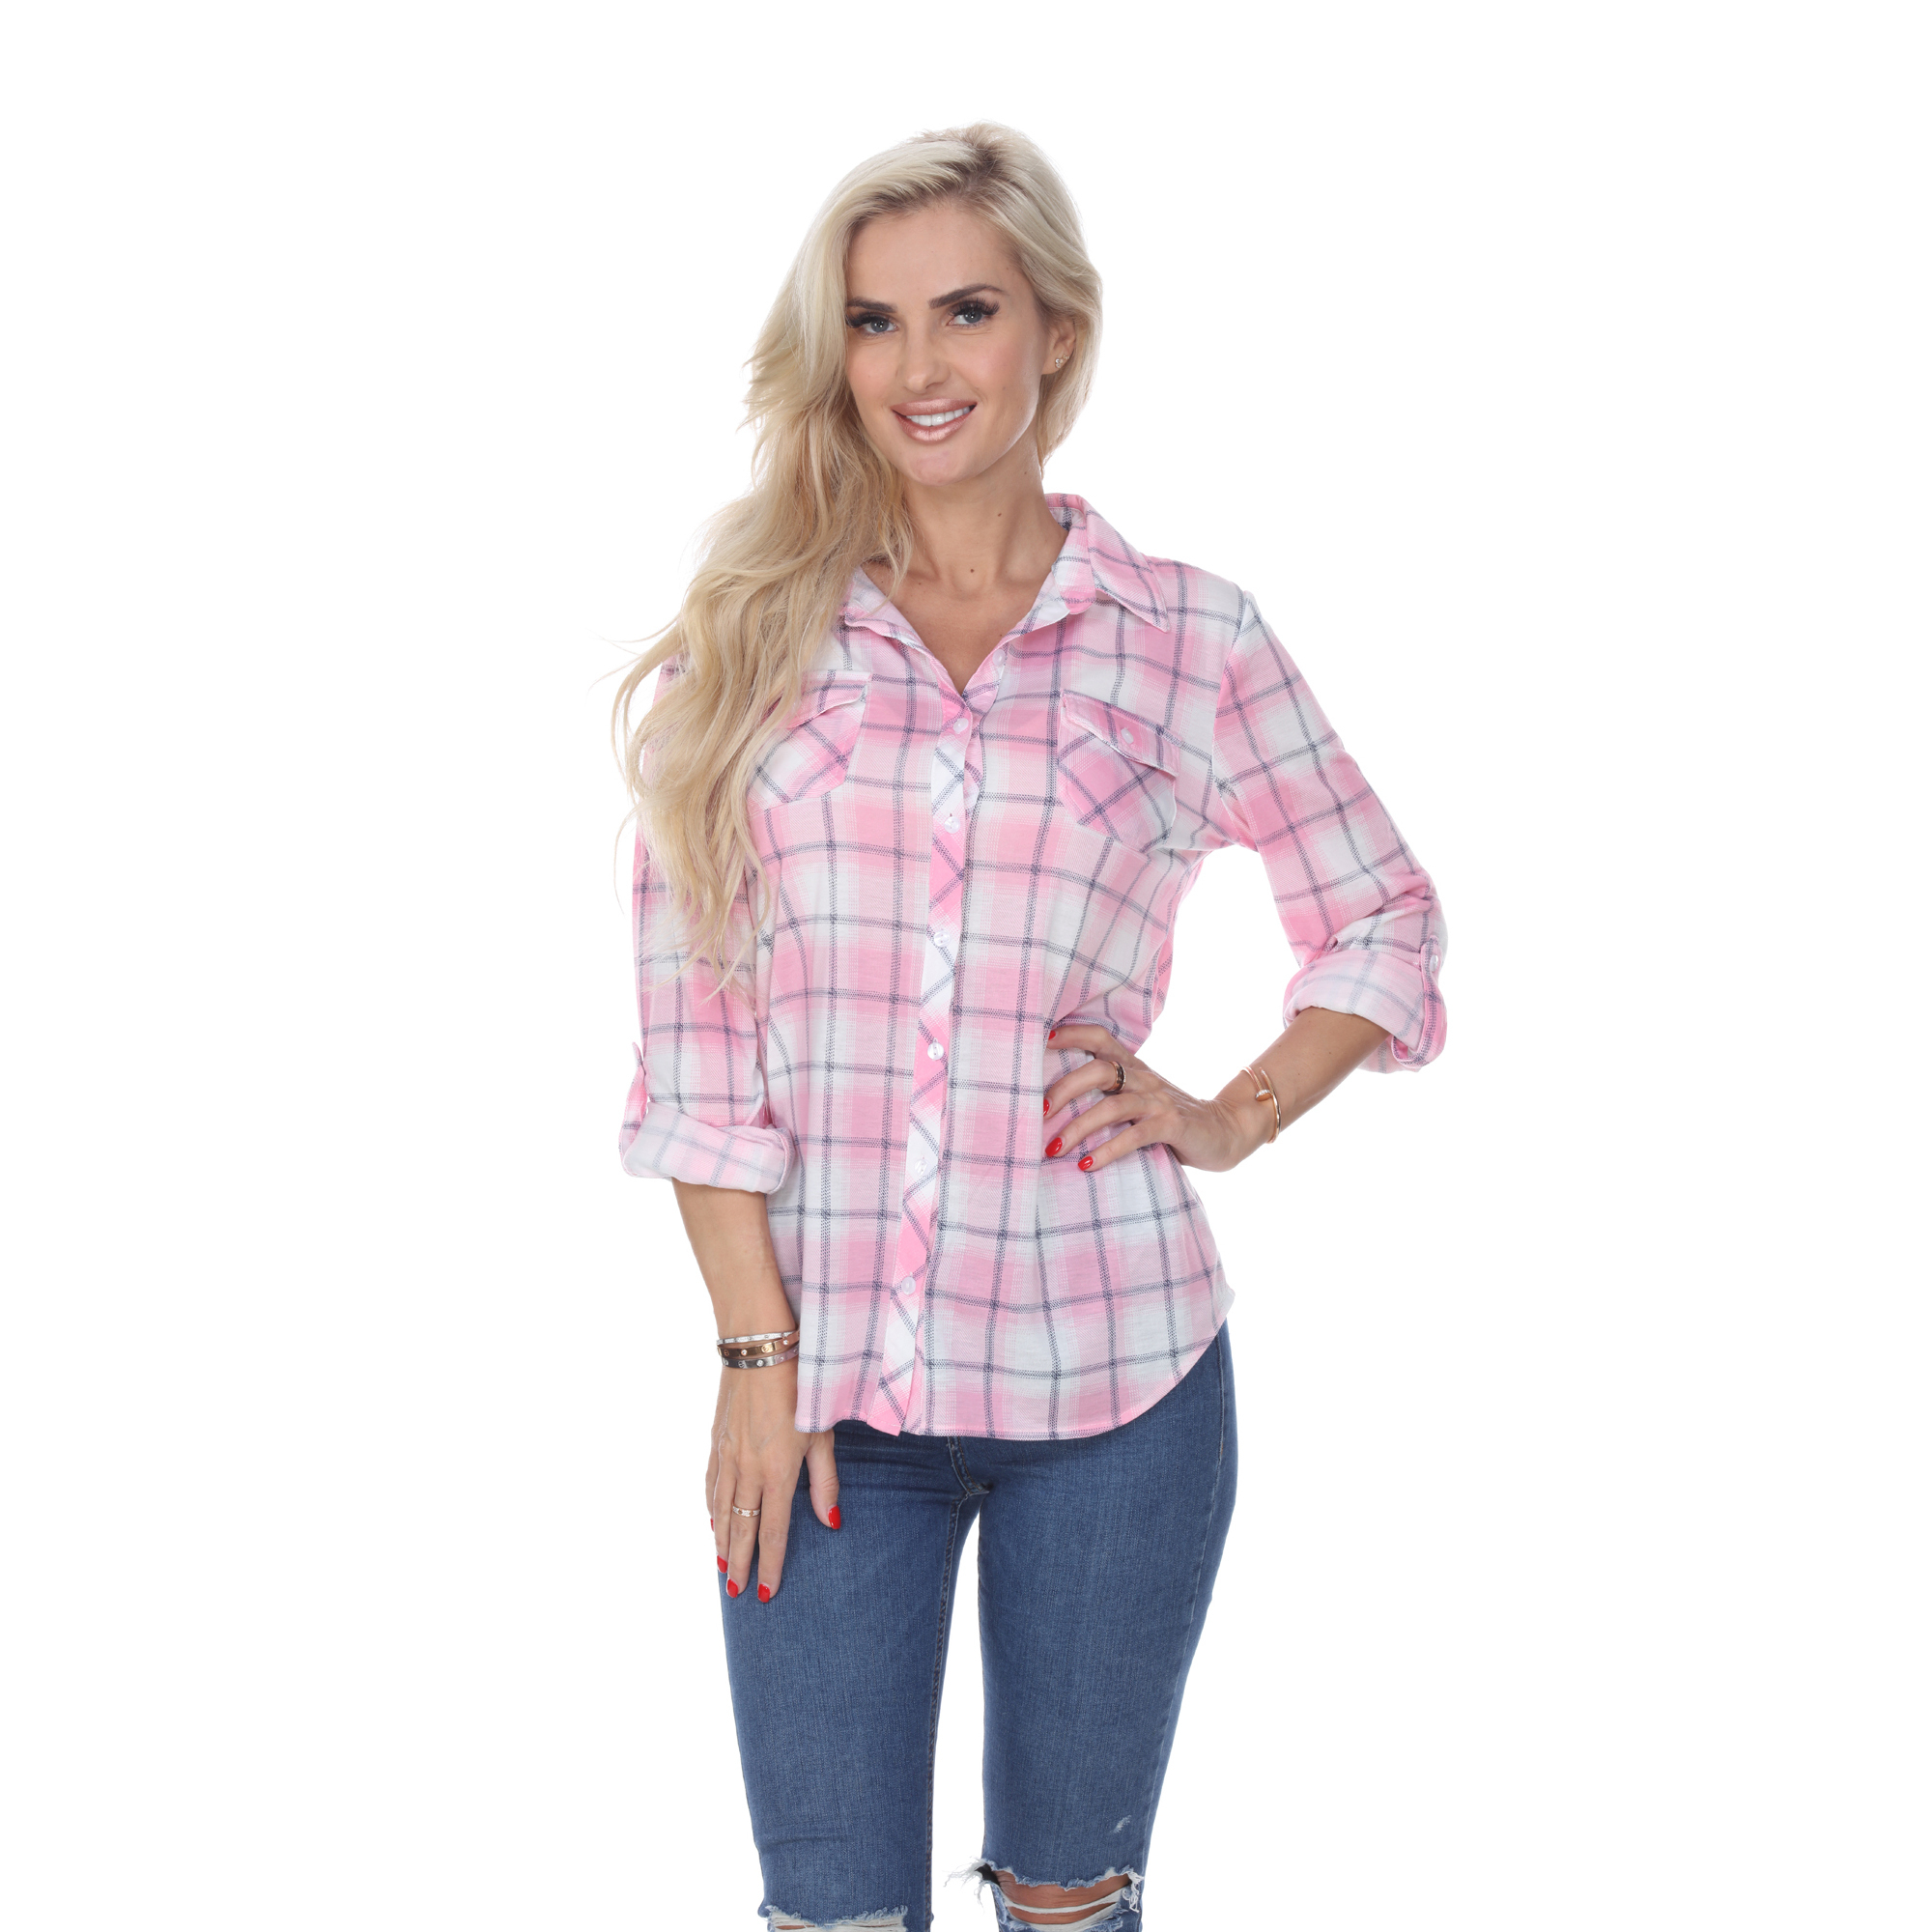 White Mark Women's Stretchy Plaid Flannel Shirt - Red/Black, Large